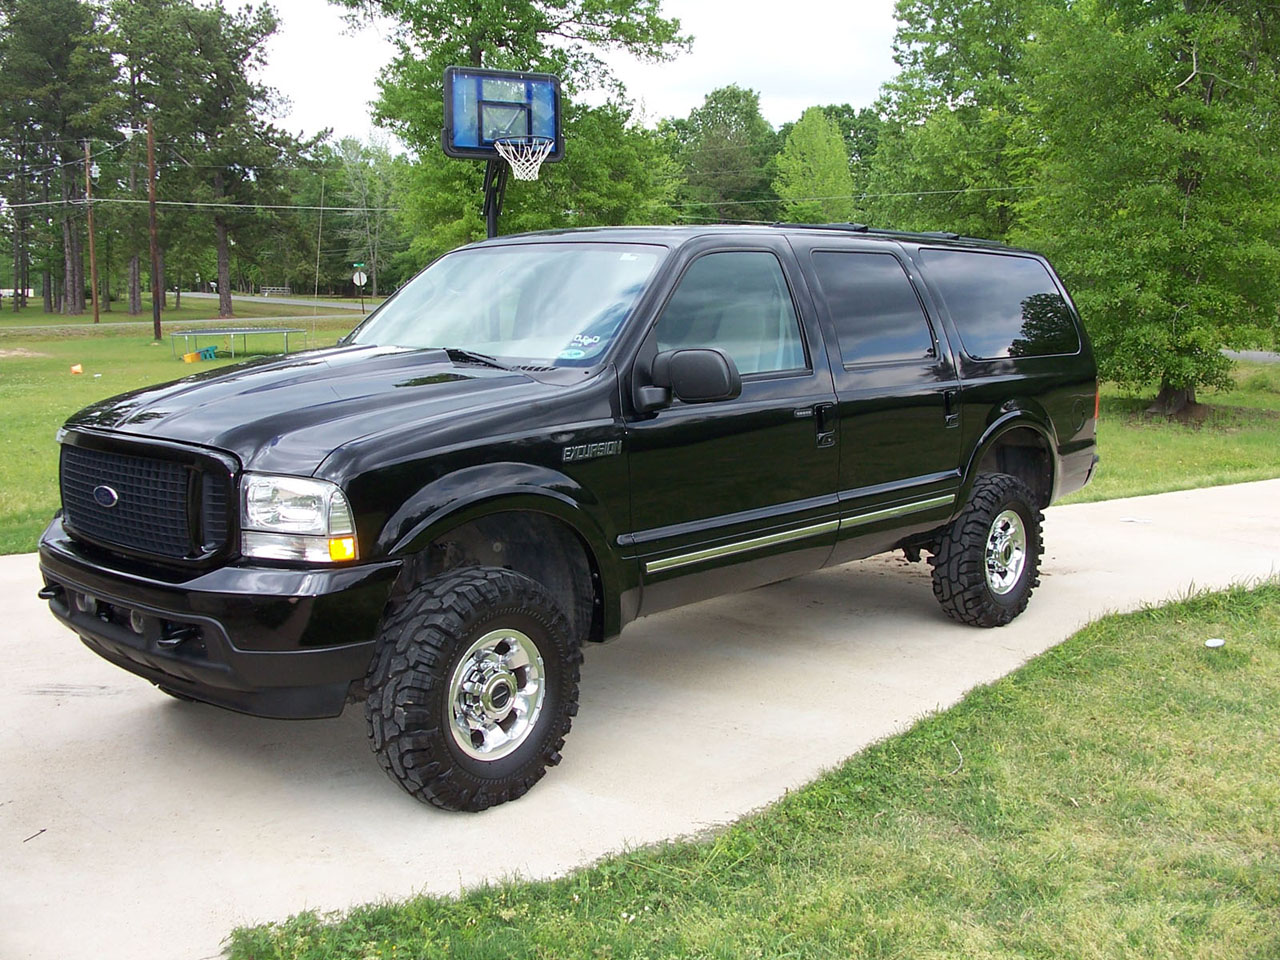  2004 Ford Excursion limited